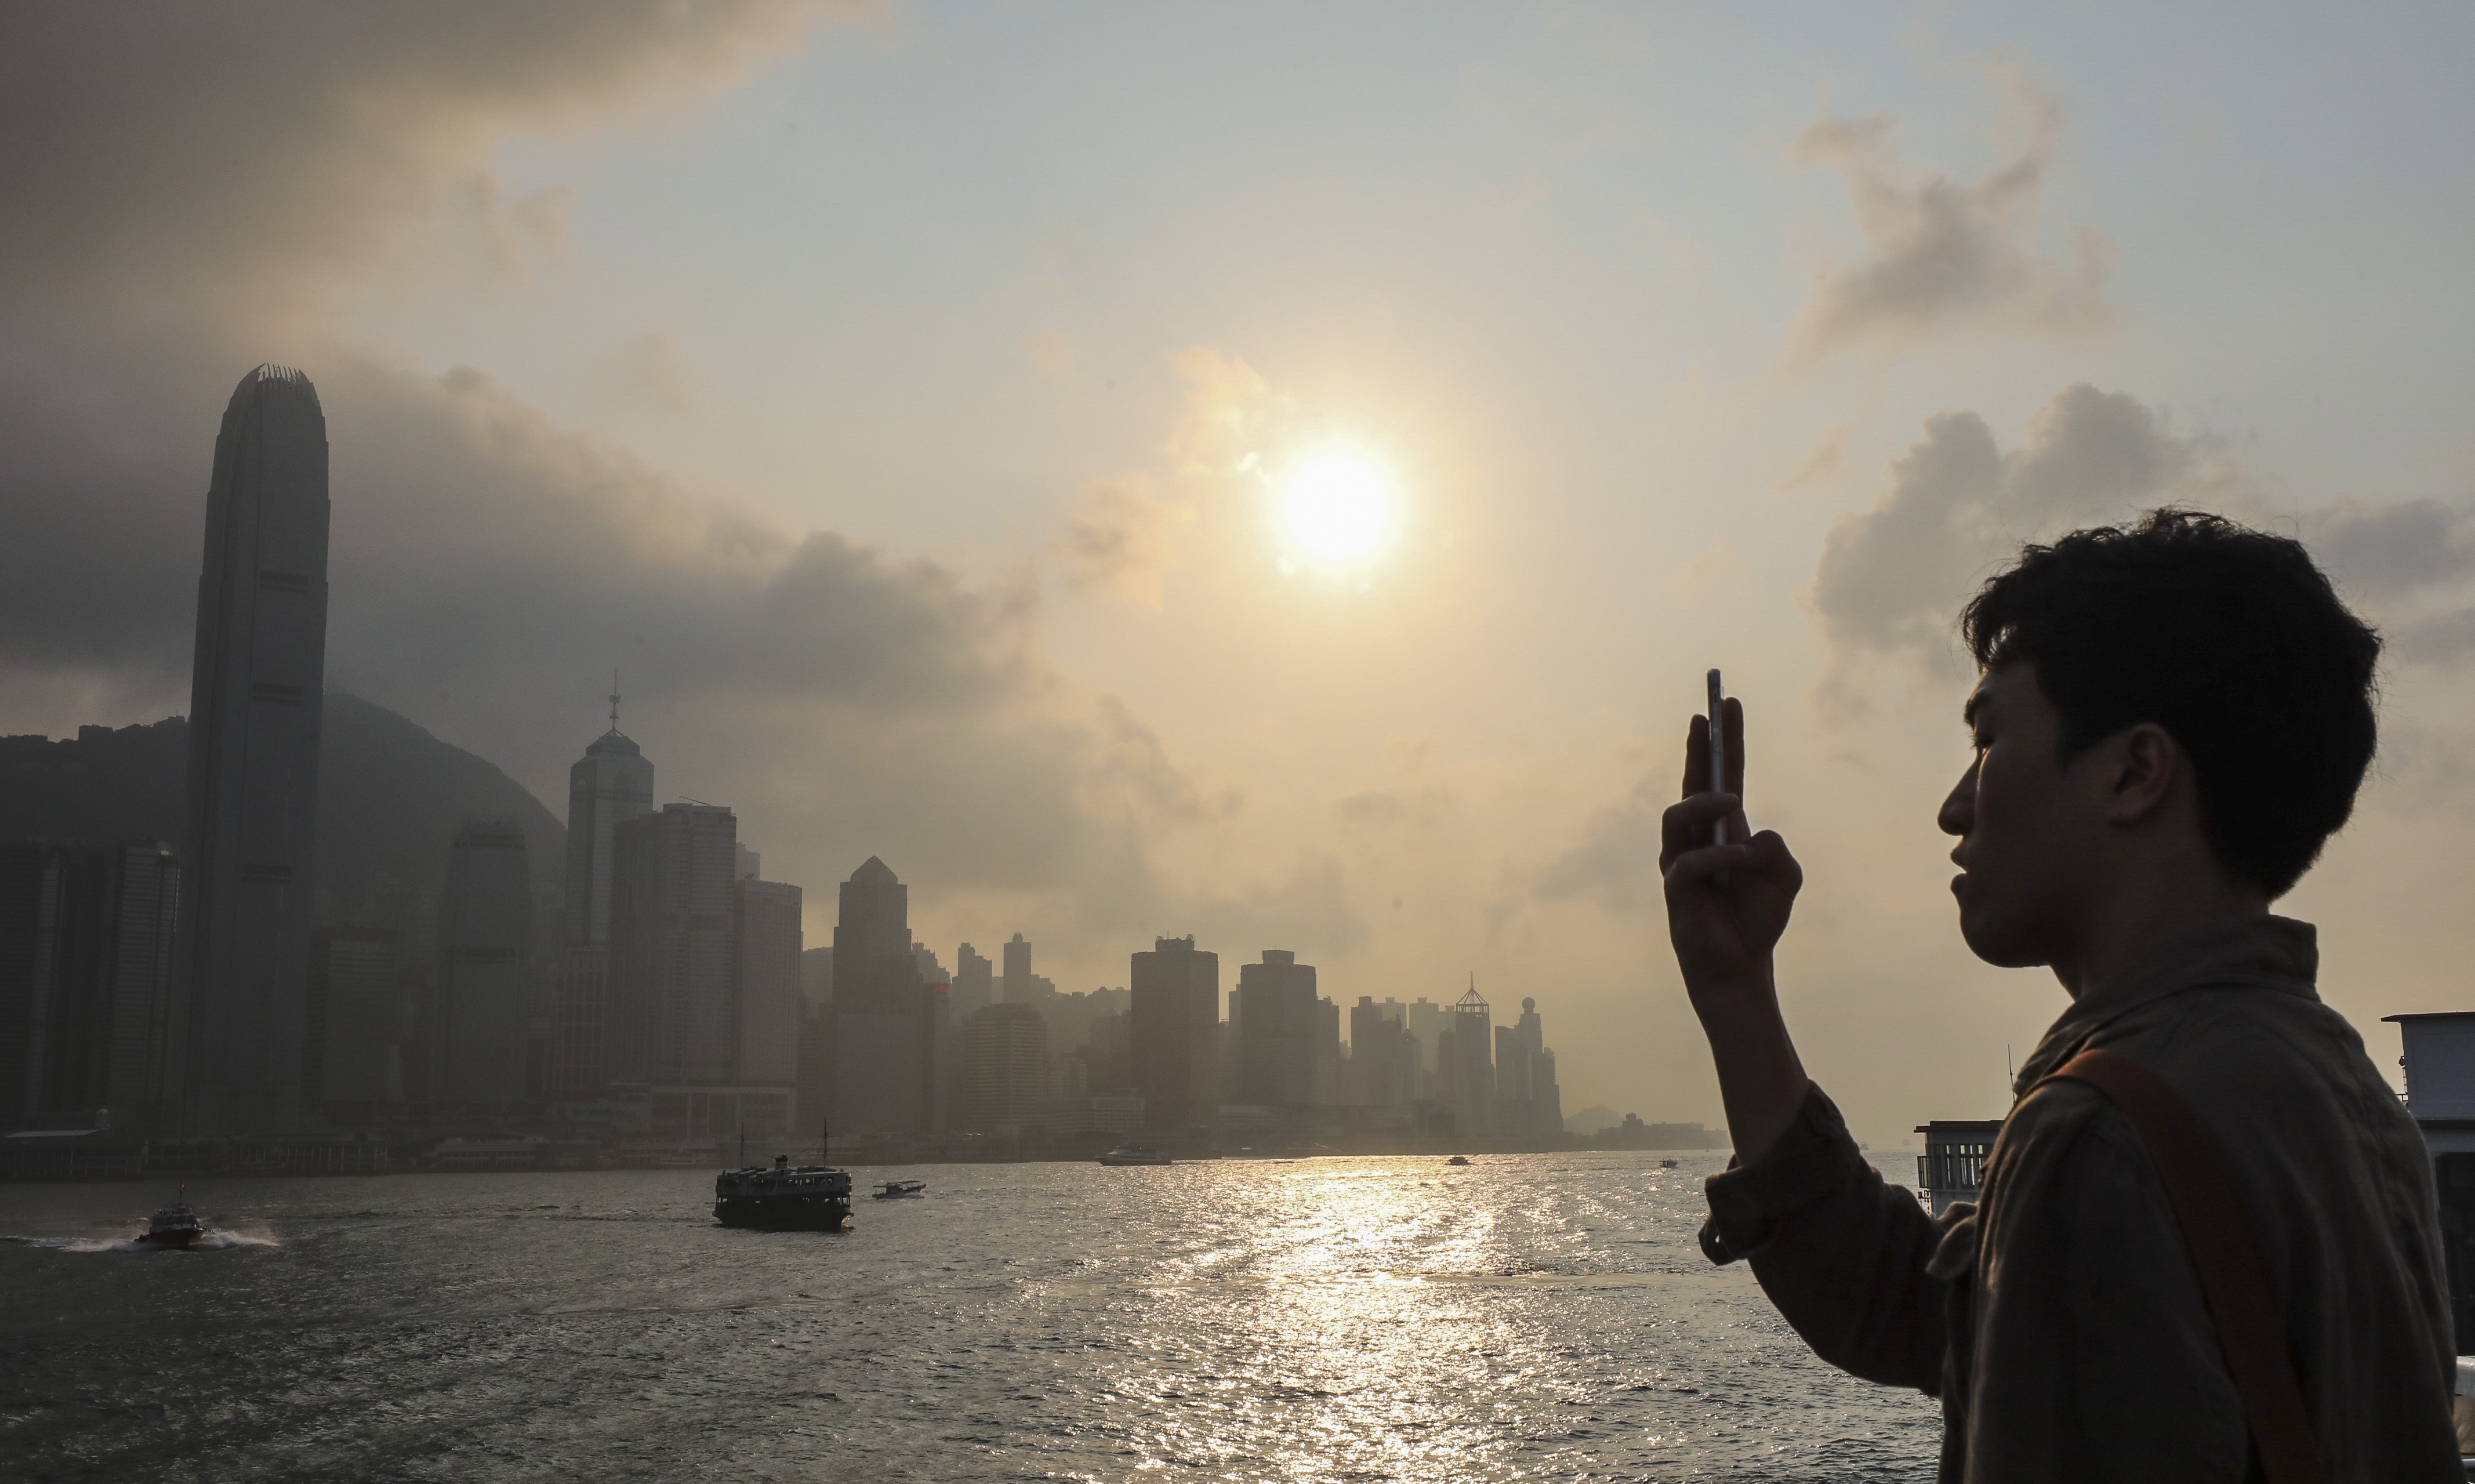 As Hong Kong moves on from its colonial past, it may need to ask questions about its new identity. Photo: Felix Wong